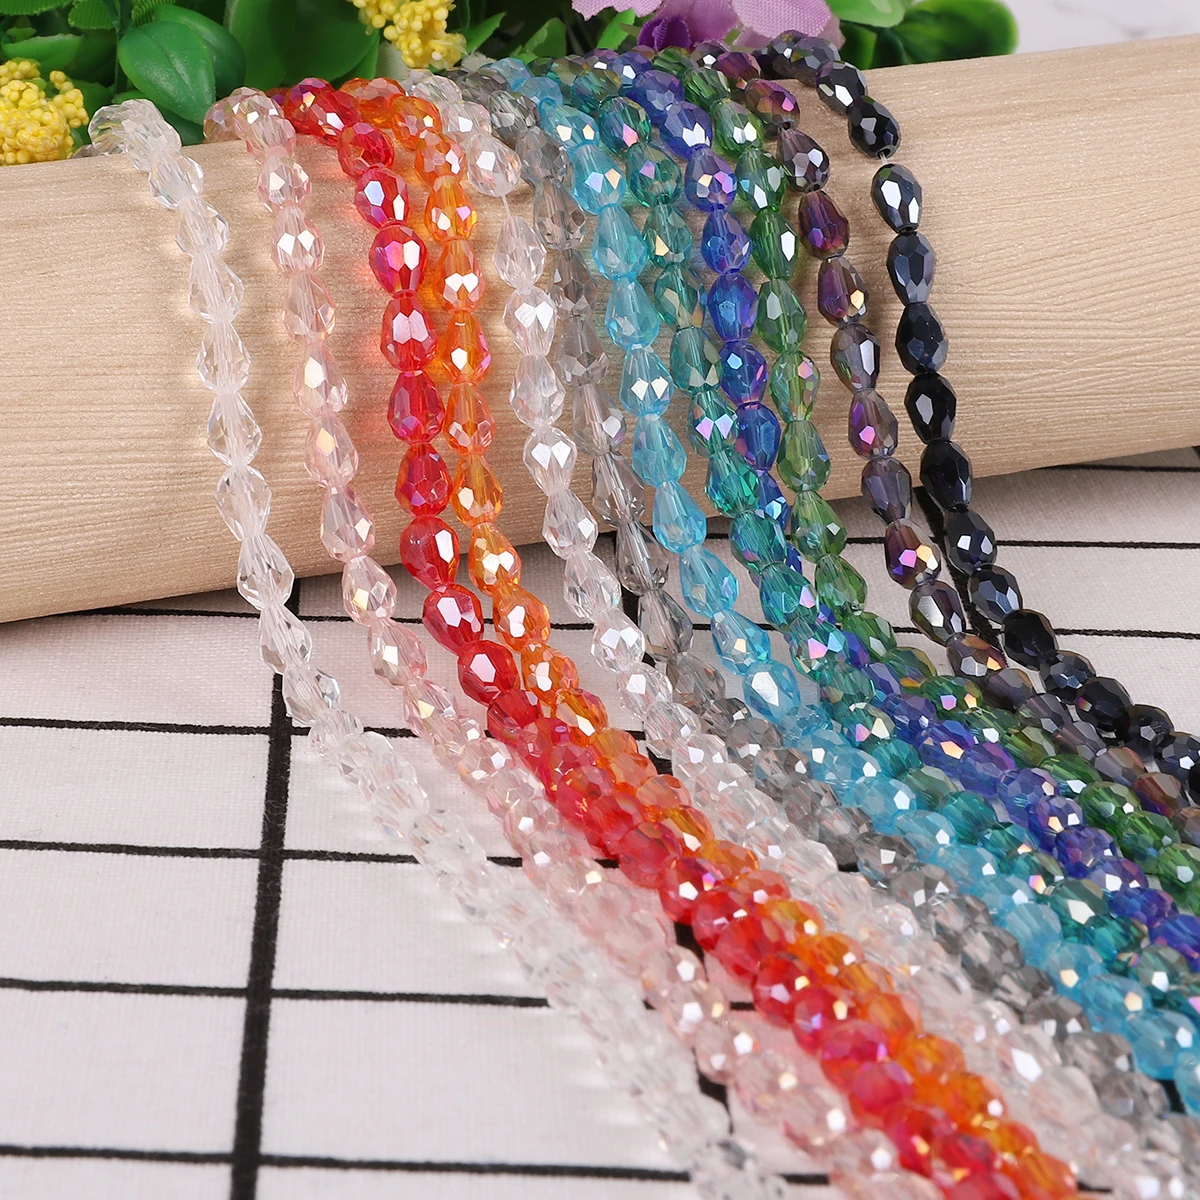 72pcs Crystal Beads Loose Spacer Teardrop Jewelry Findings Assorted Wholesale 